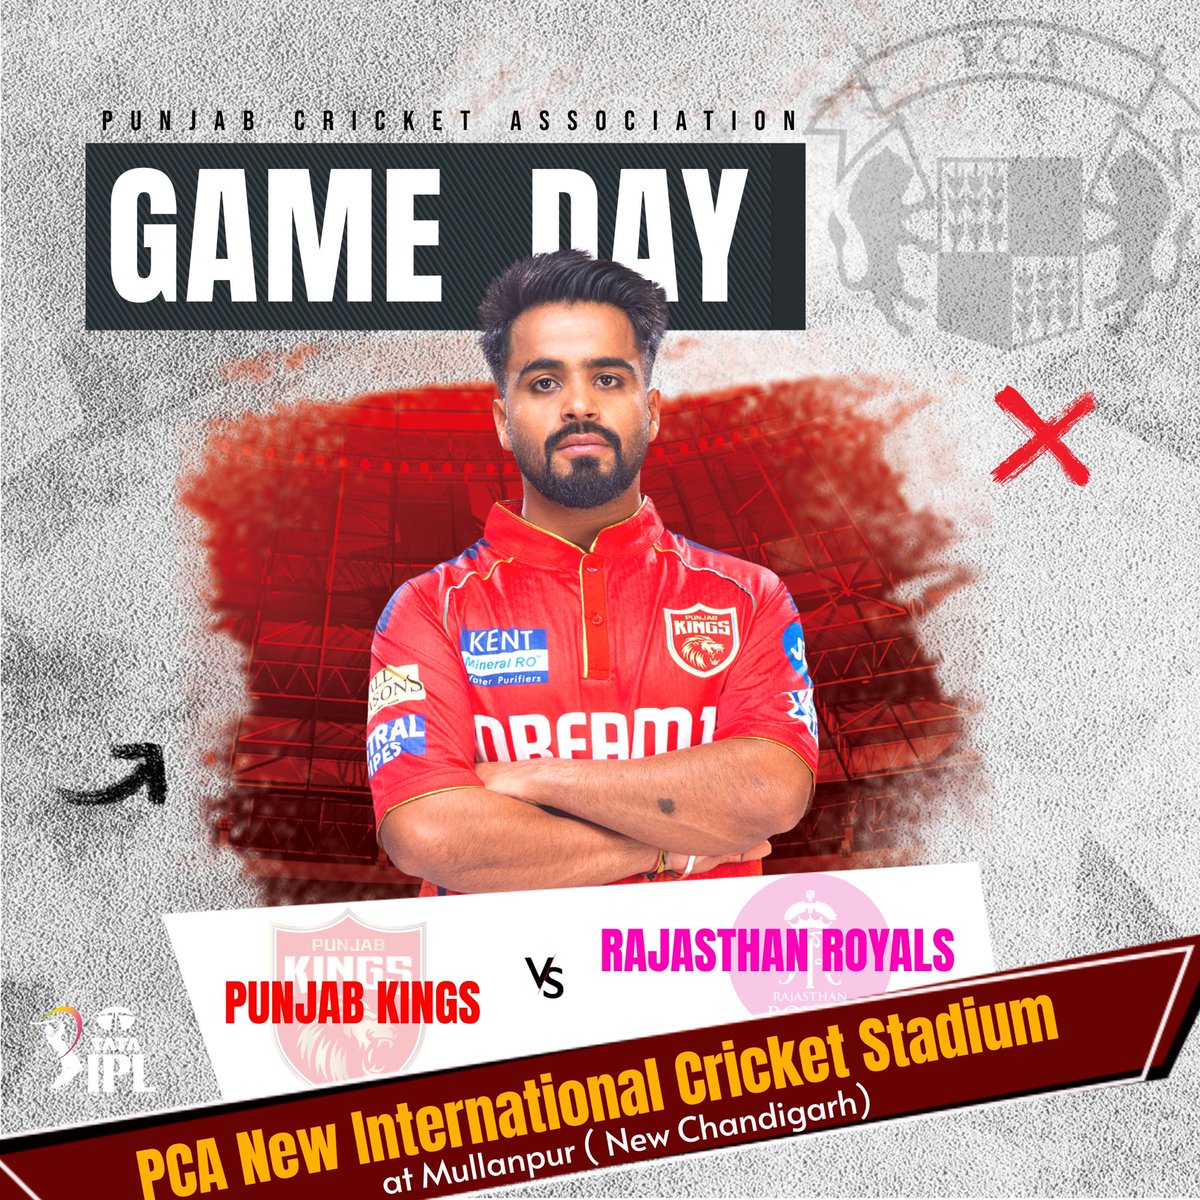 Battle of the Royals: Punjab Kings clash with Rajasthan Royals today at the cutting-edge PCA New International Cricket Stadium in Mullanpur. See you here!